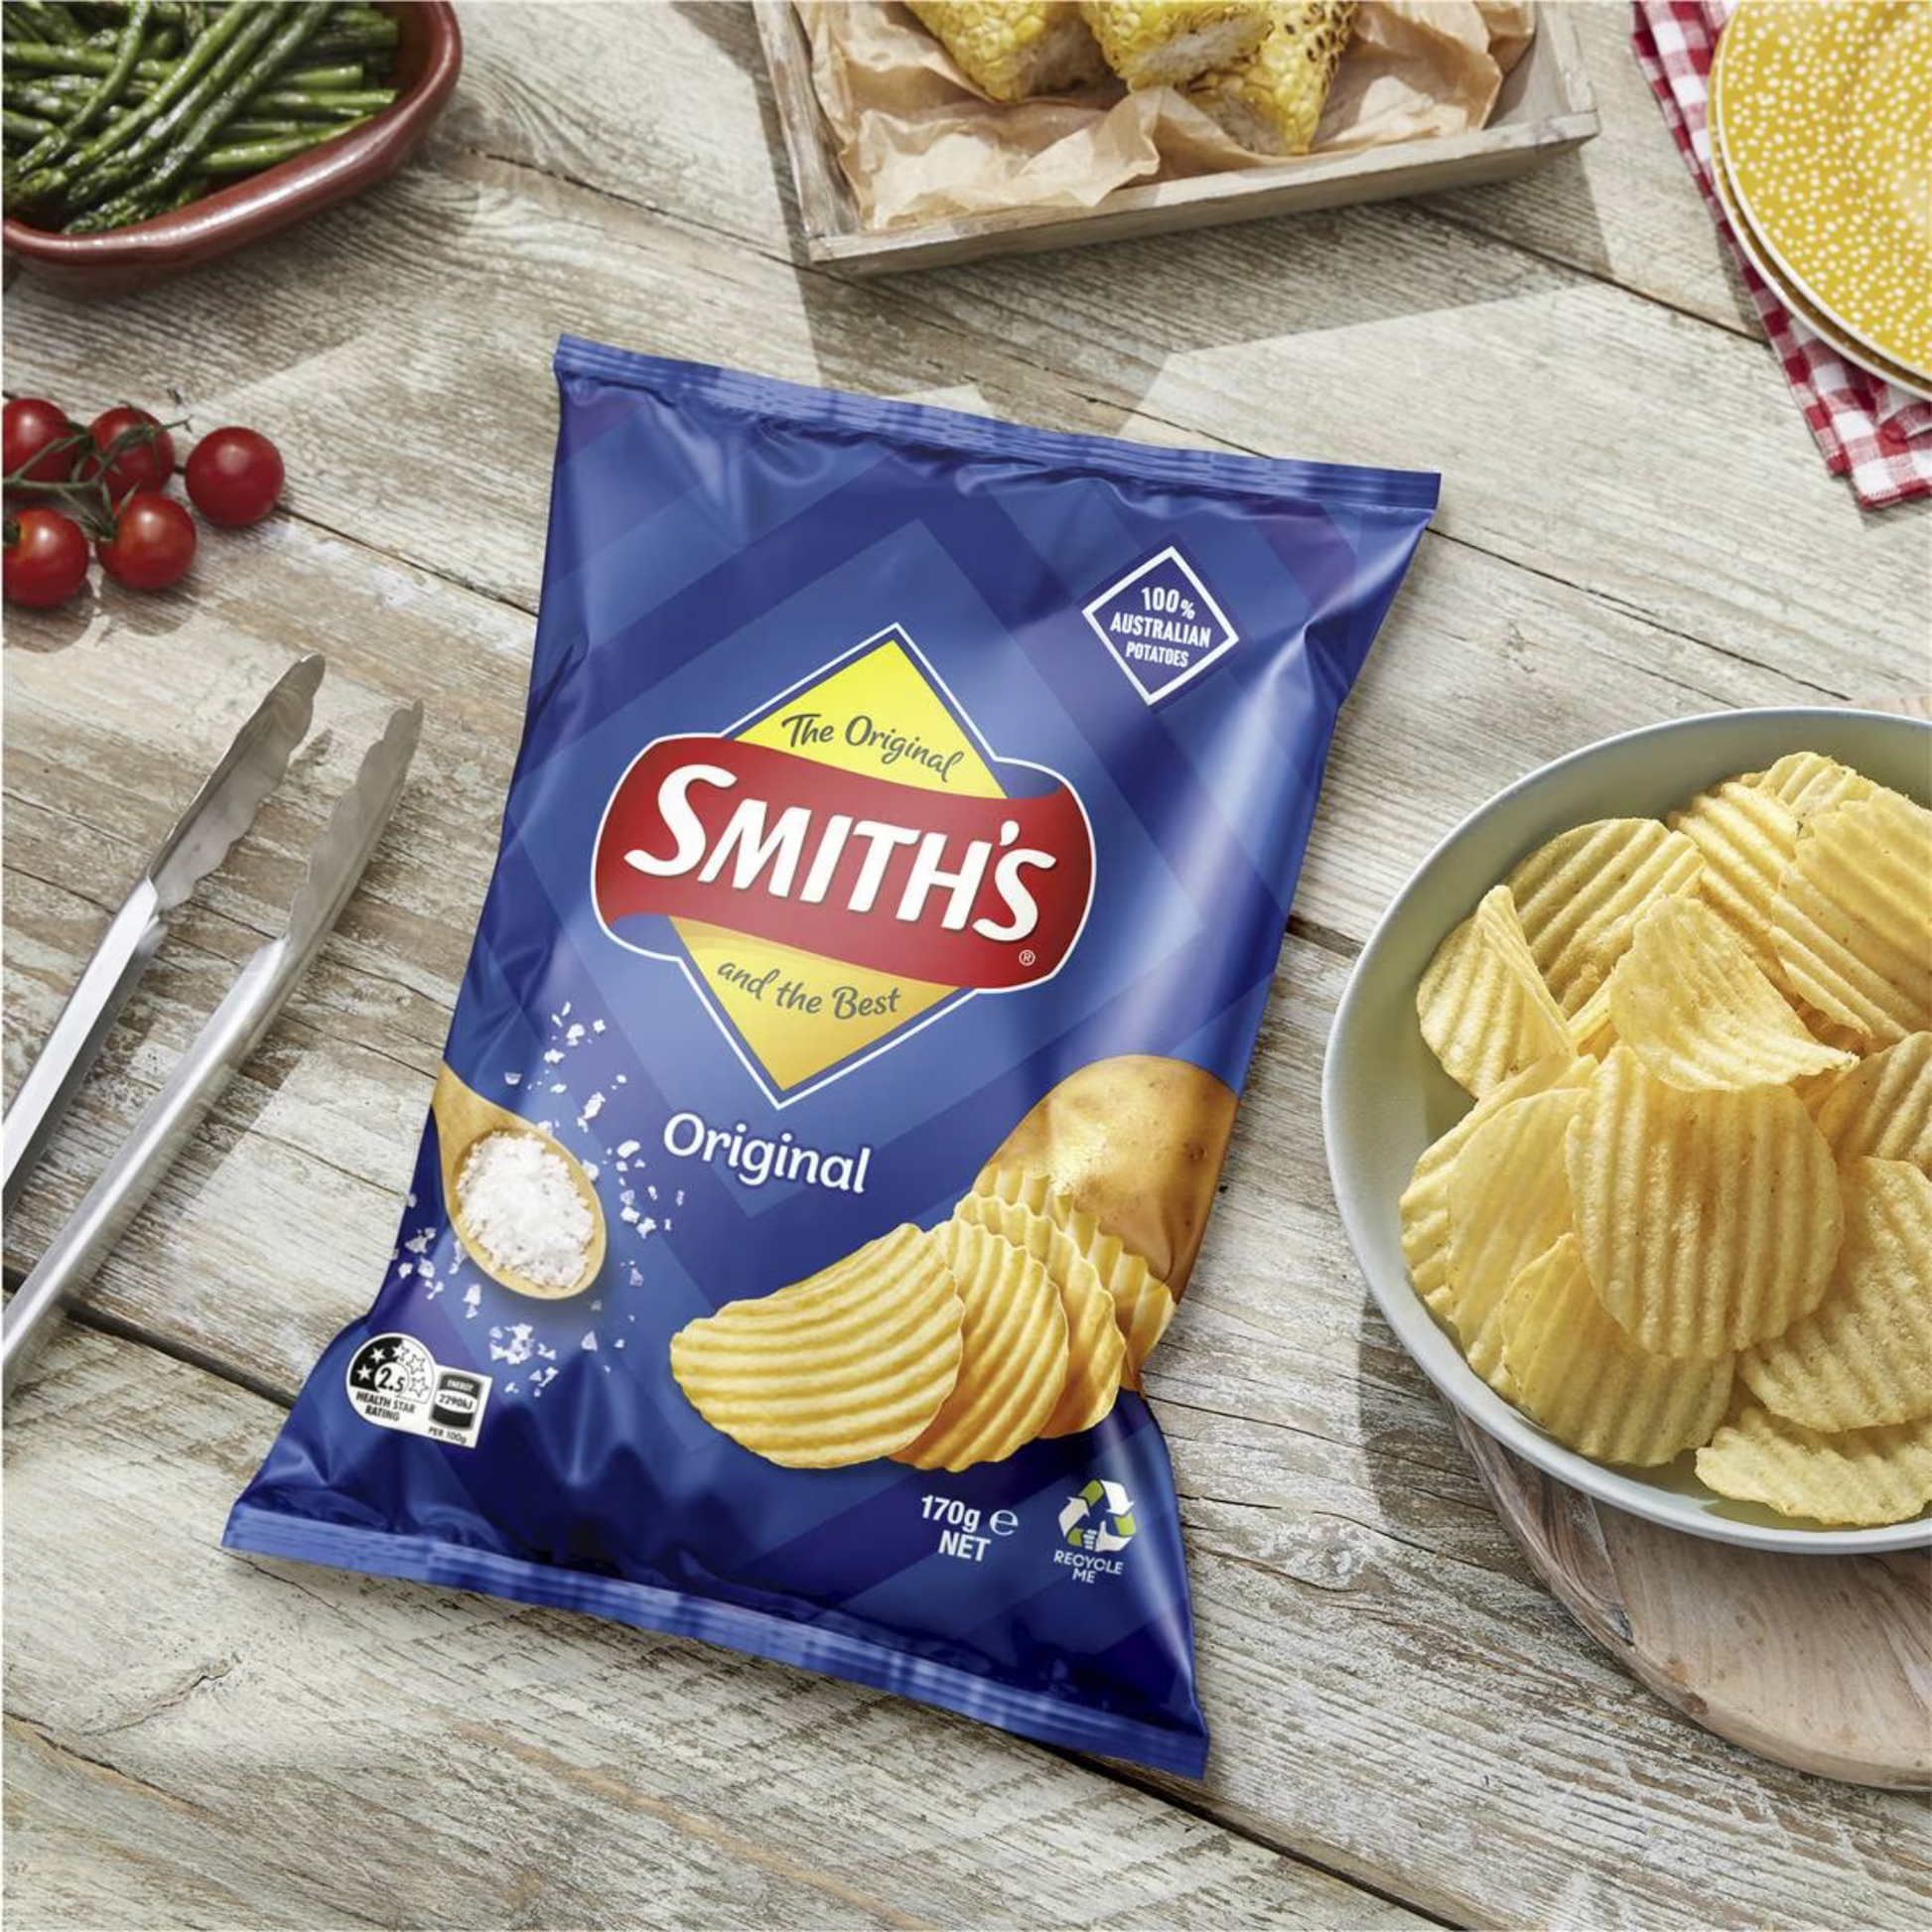 Smith's Crinkle Cut Potato Chips are made with 100% Australian potatoes & real ingredients that you can taste. Original salted flavour. Made from top quality Aussie potatoes. No artificial colours or flavours. Halal suitable. Gluten free. Best genuine foreign delicious snacks chip reasonable price in Dhaka Bangladesh.